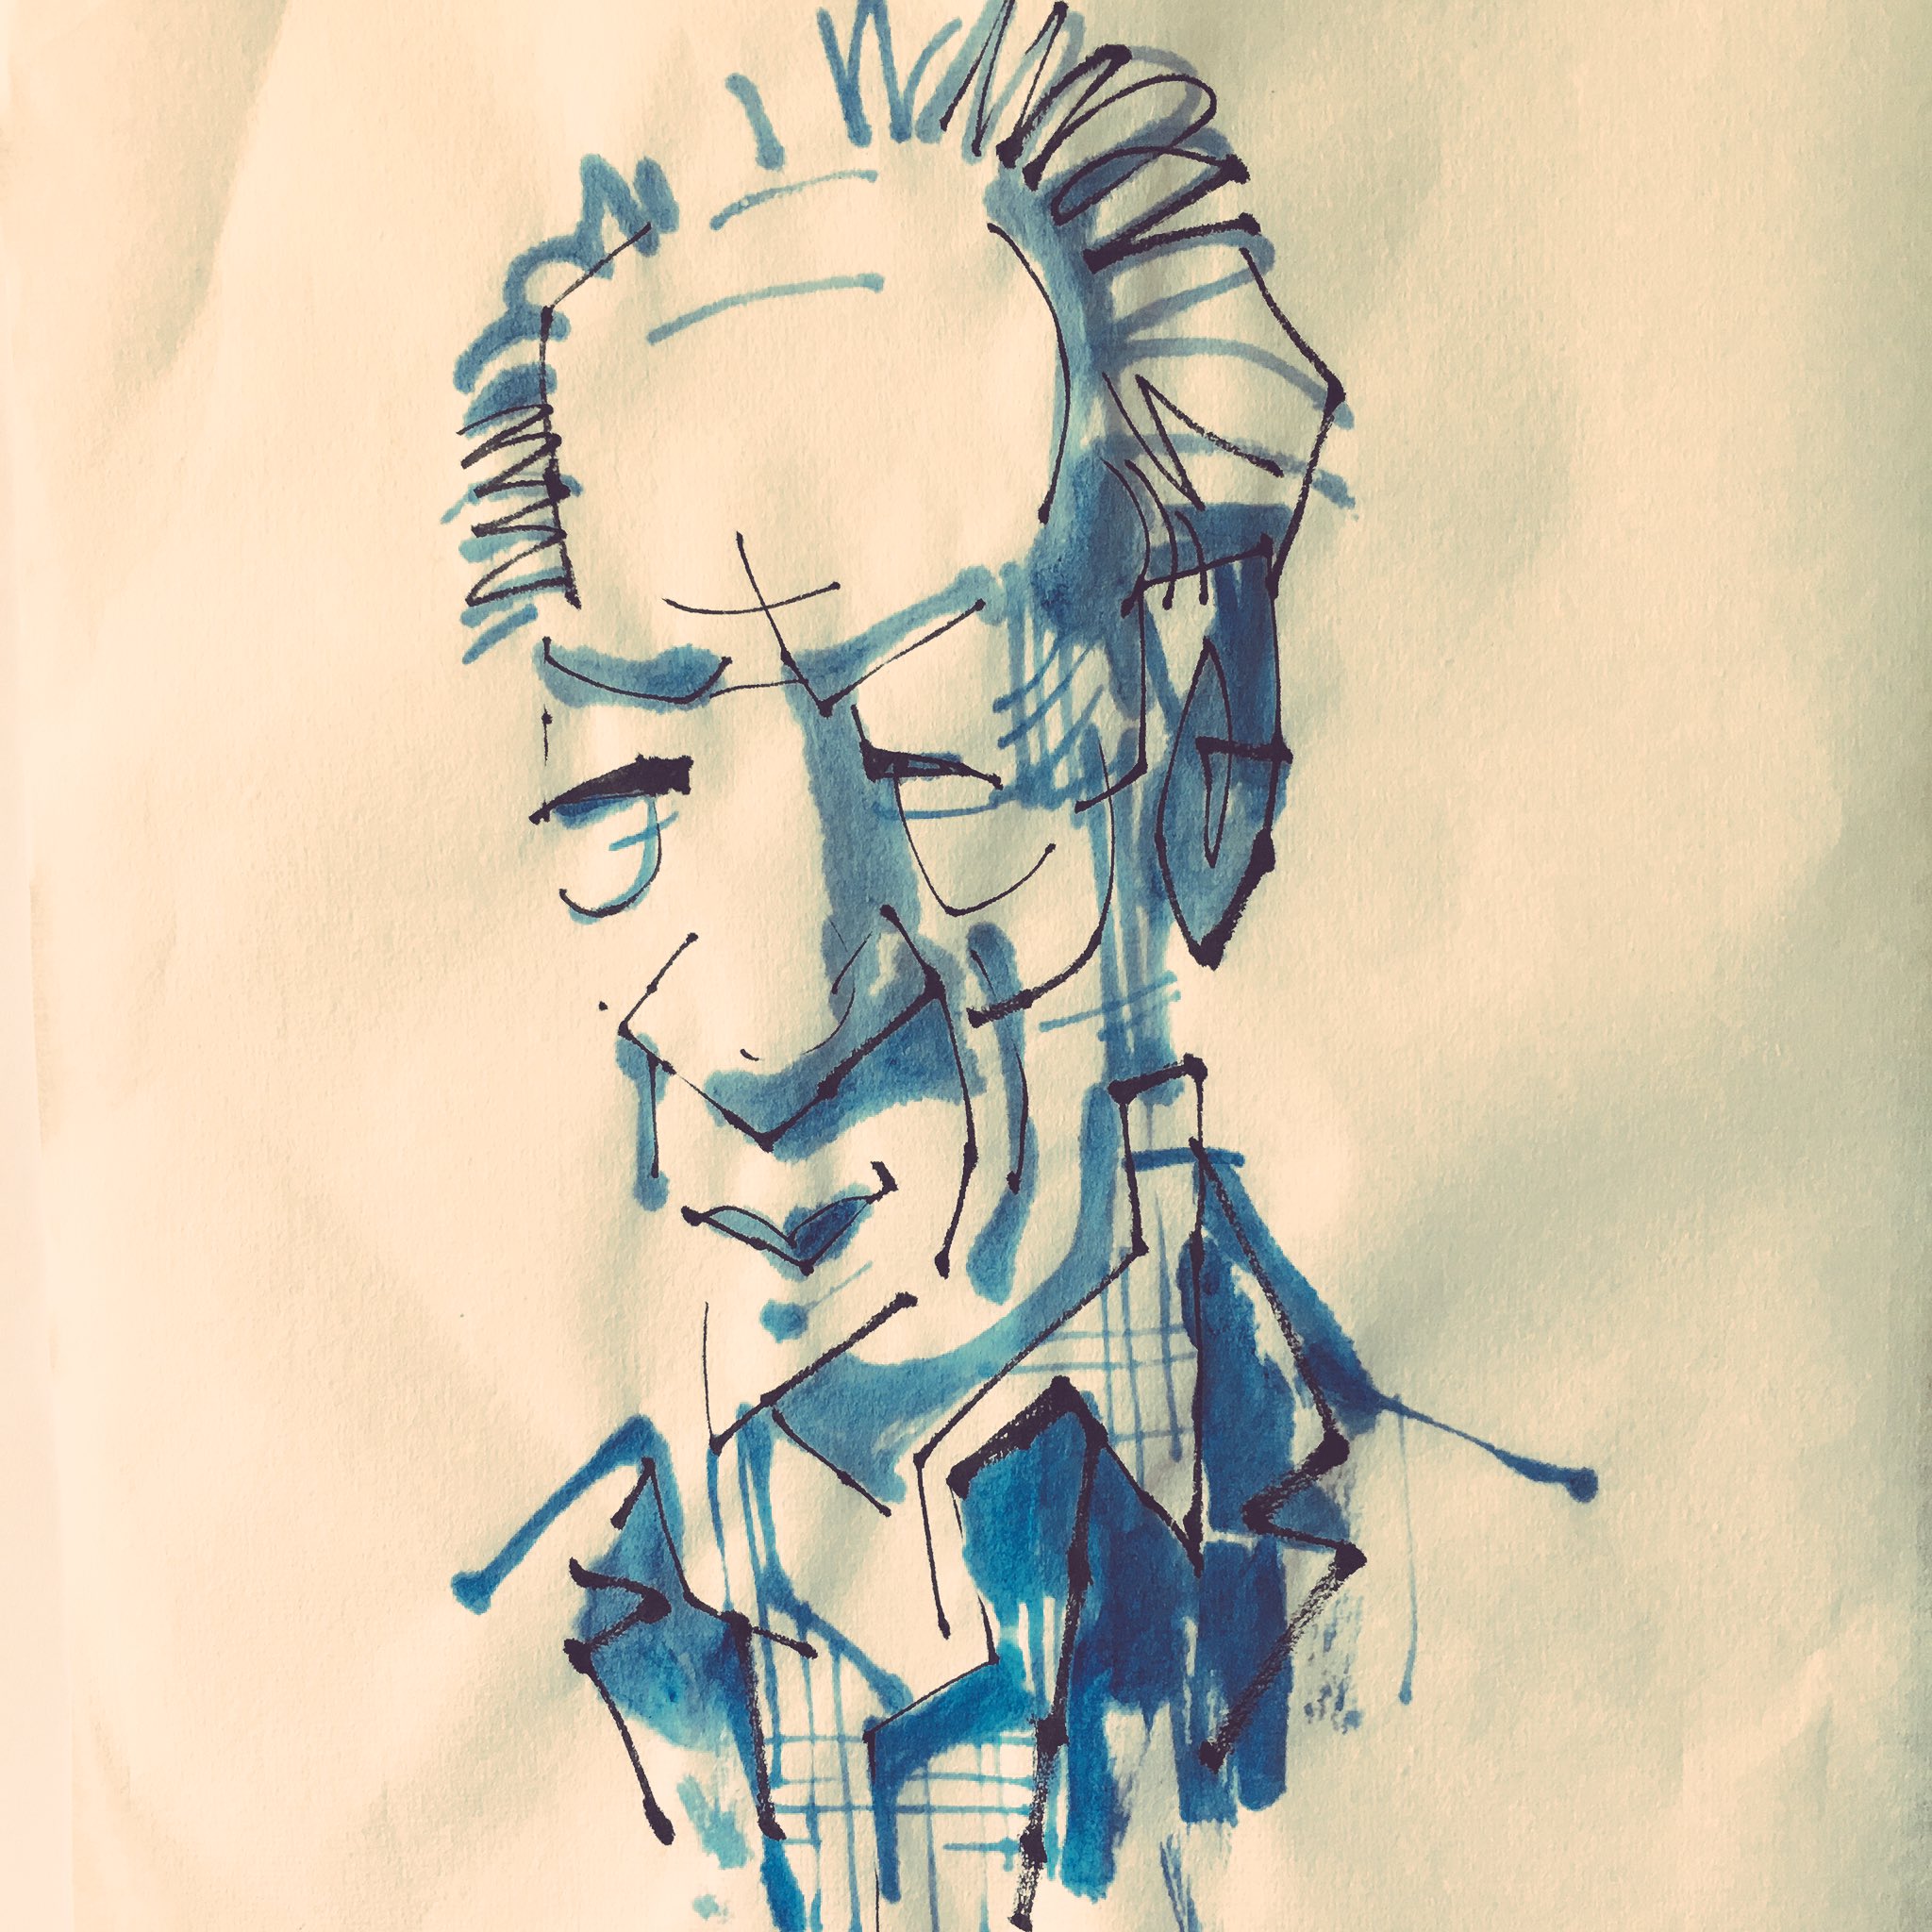 Happy birthday, Werner Herzog. A very quick brushpen and watercolour sketch on Japanese paper. 